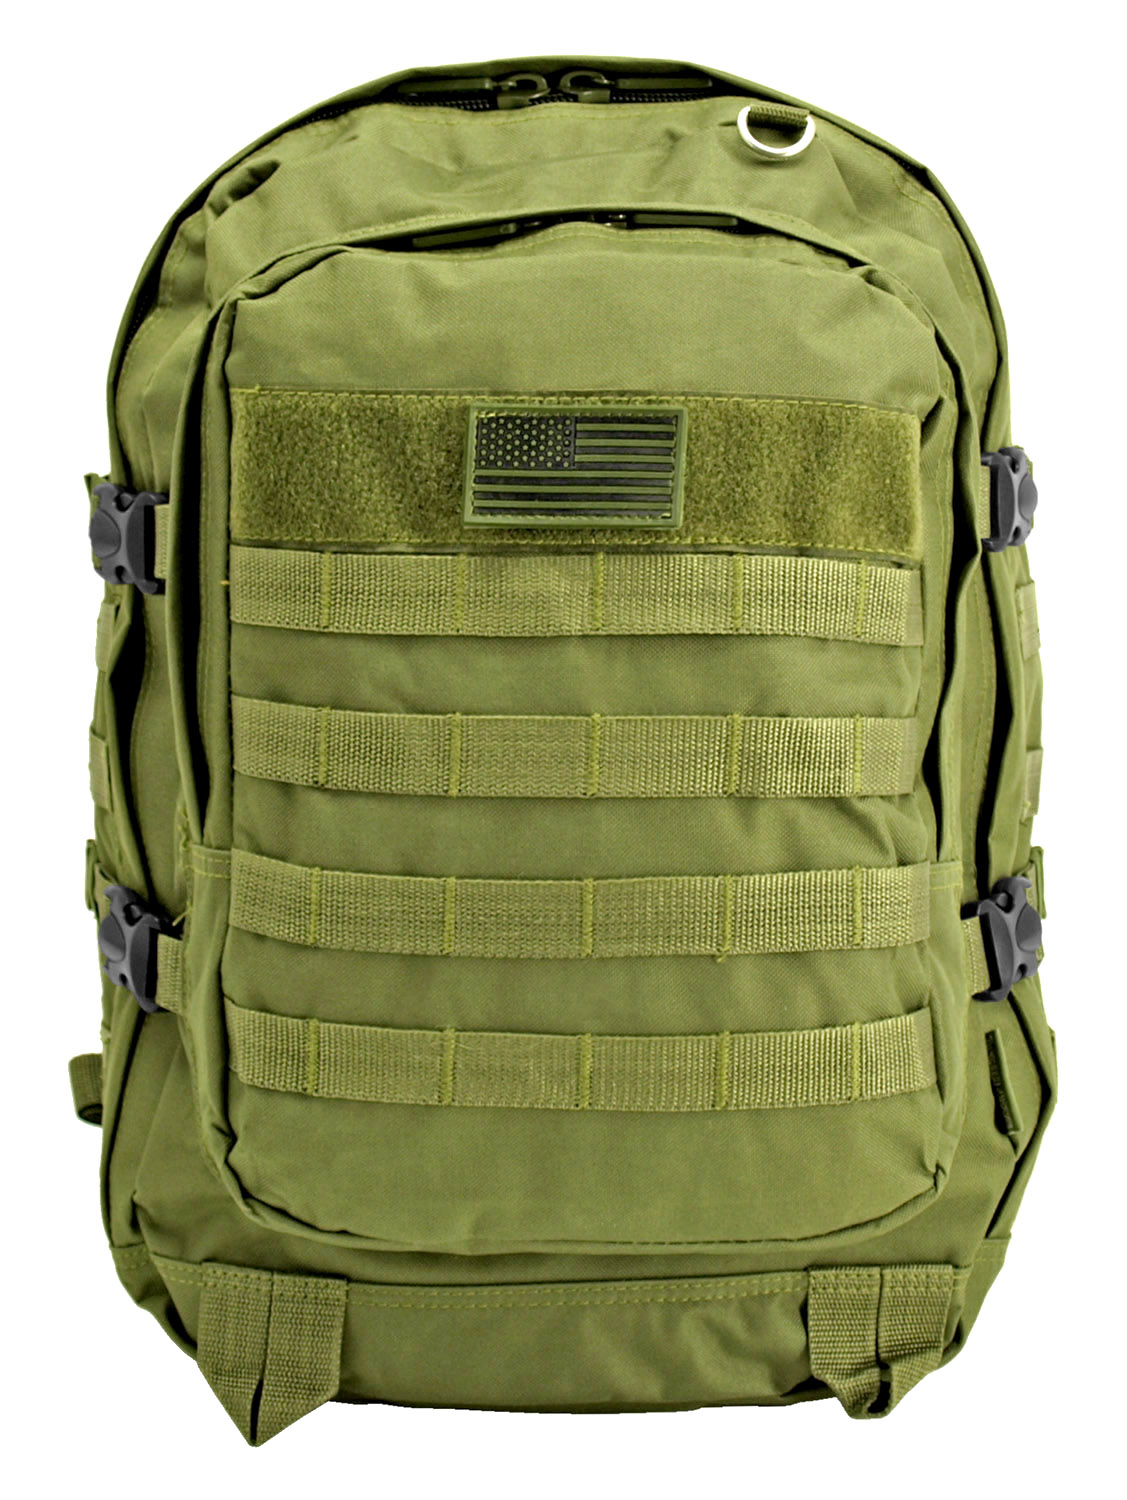 Military Molle Pack - Olive Green